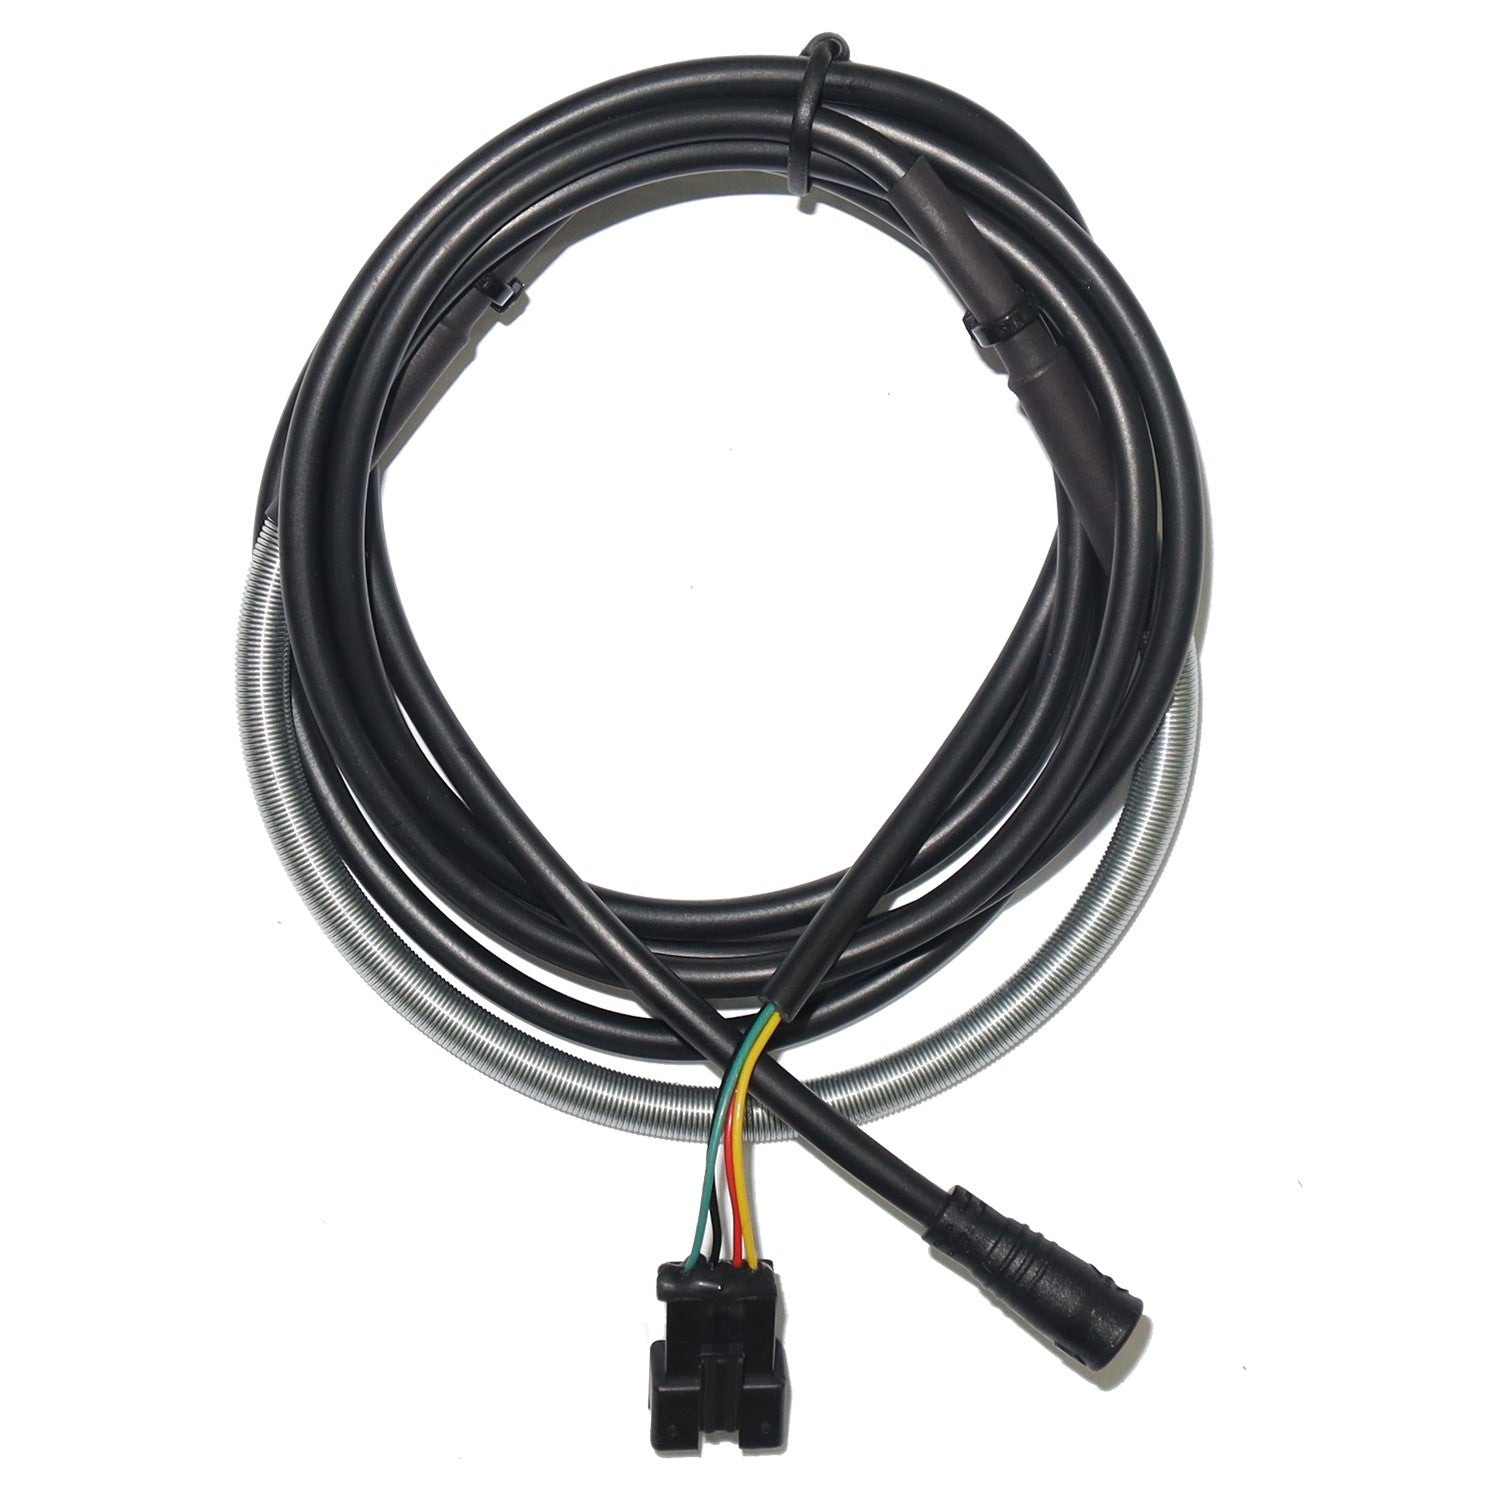 Hiboy S2 MAX Display Controller Cable